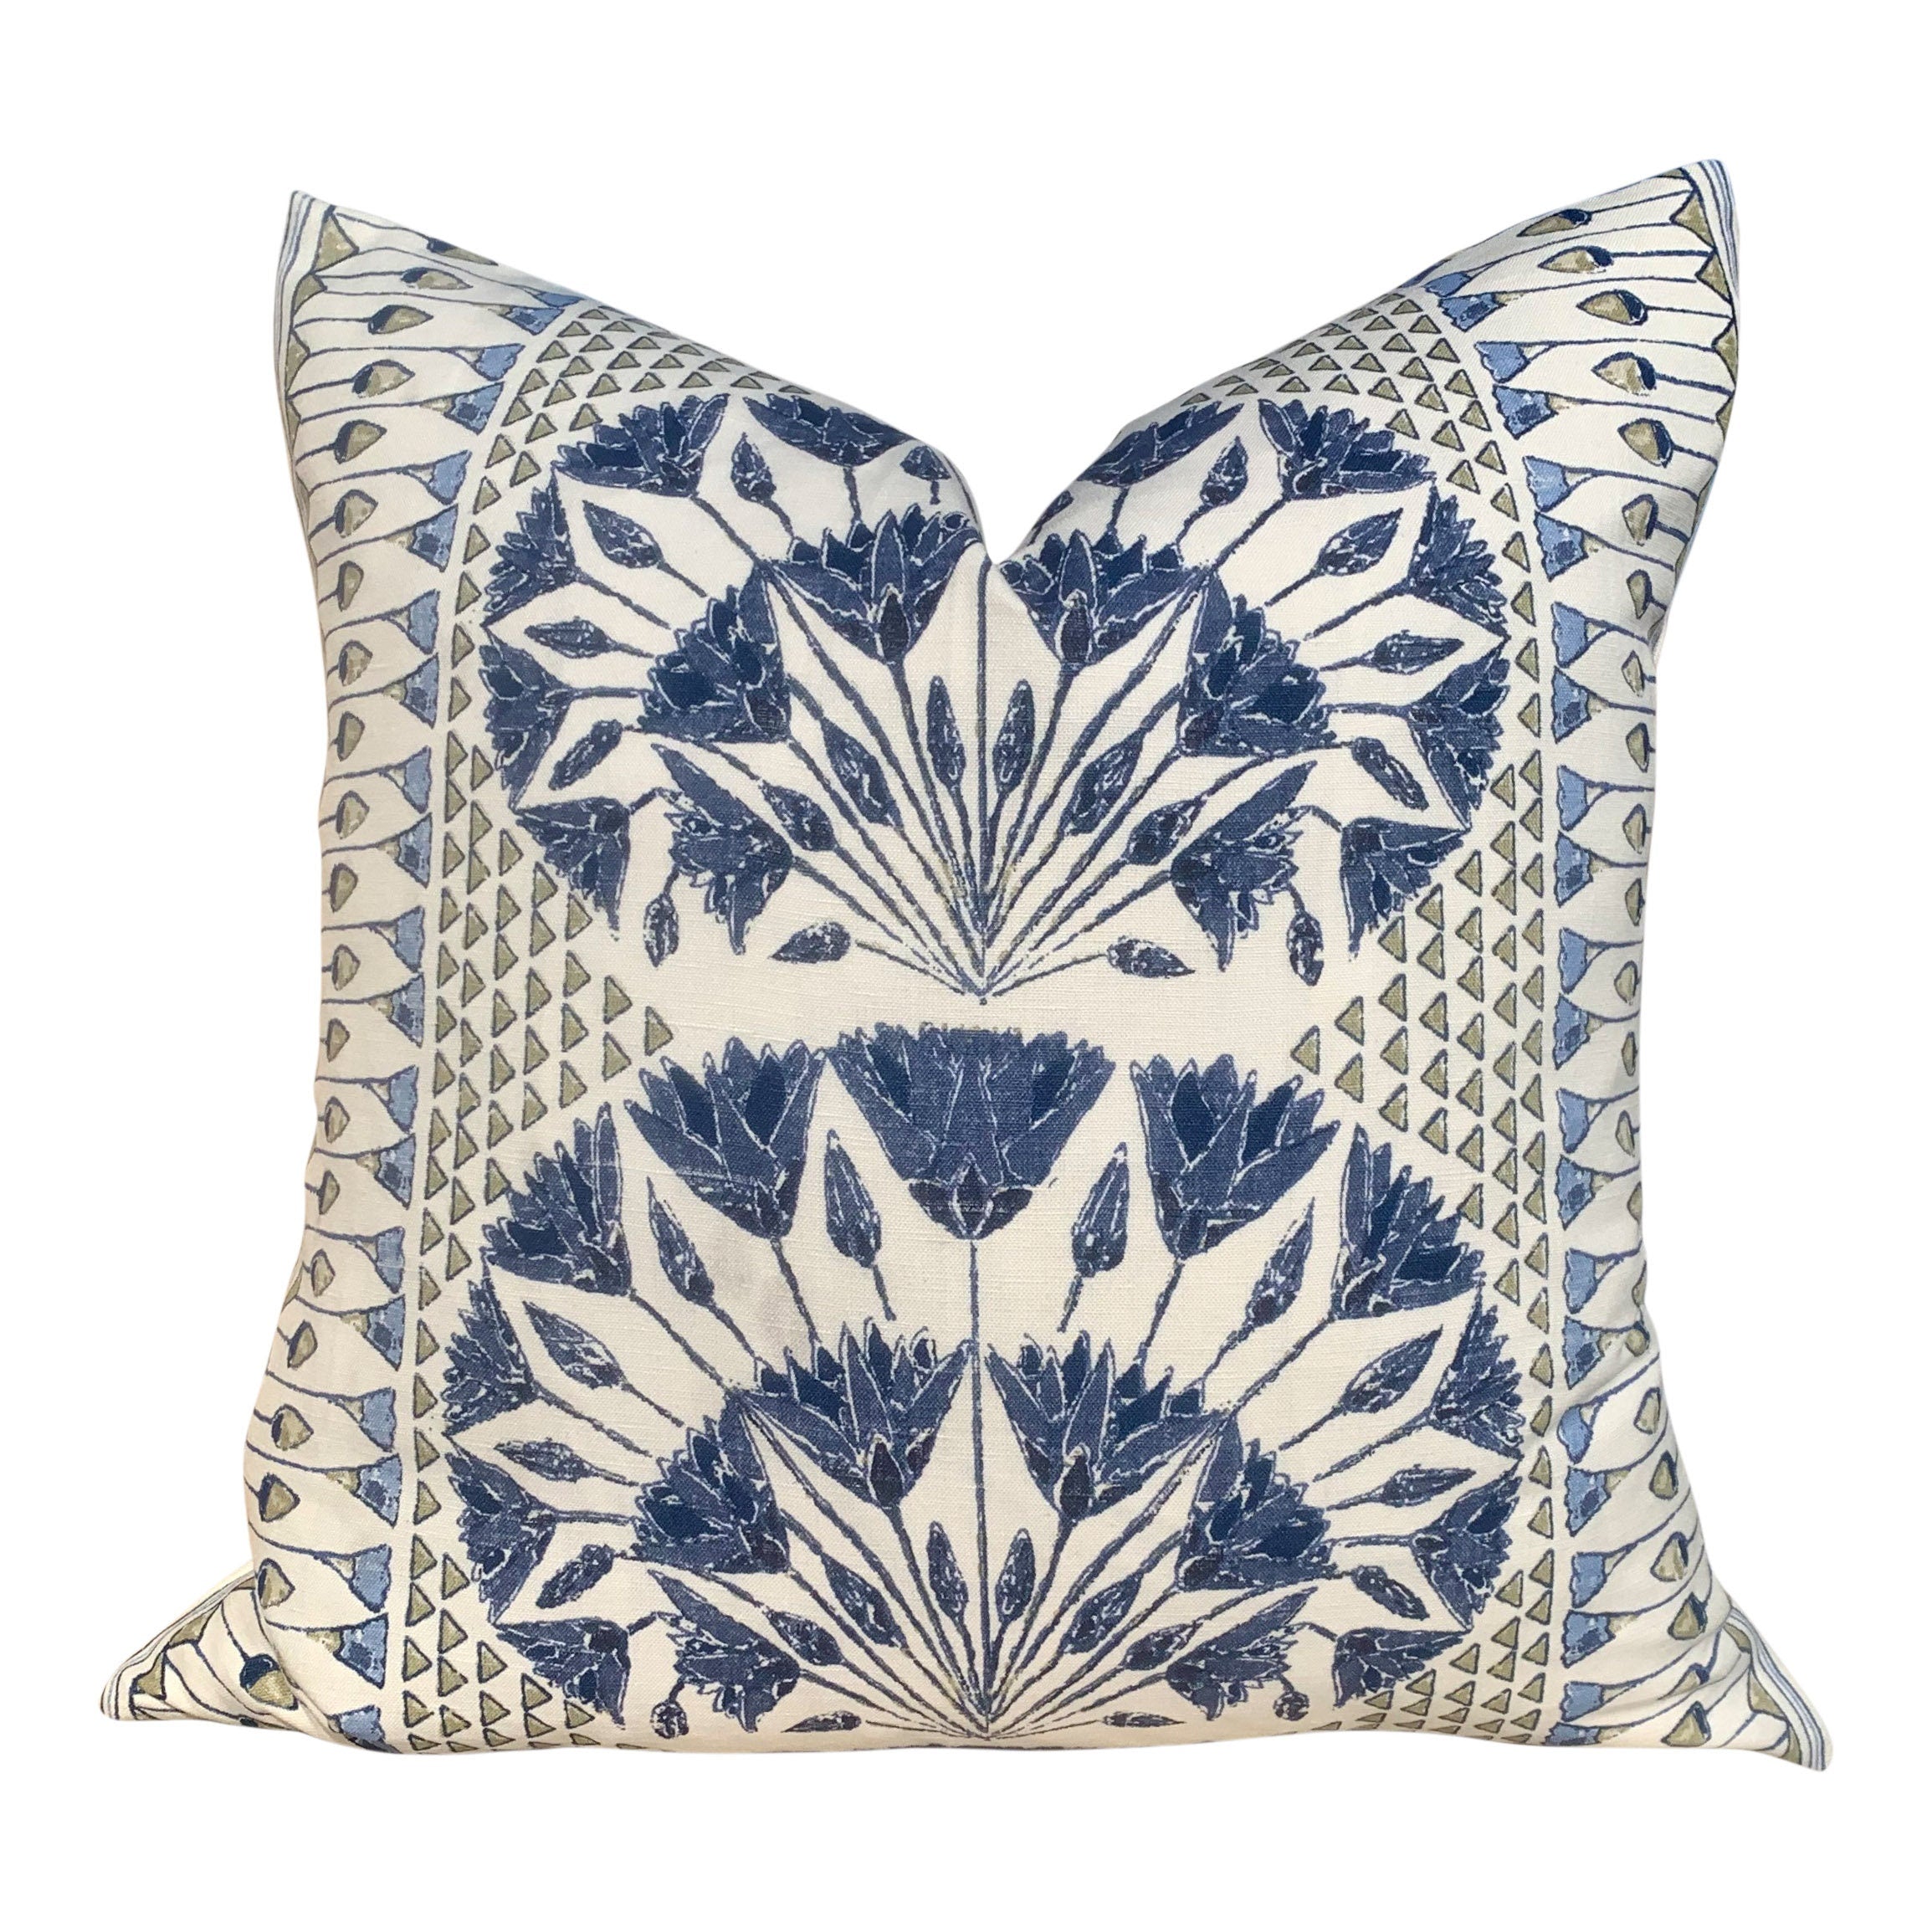 Cairo Floral Blue Pillow Cover